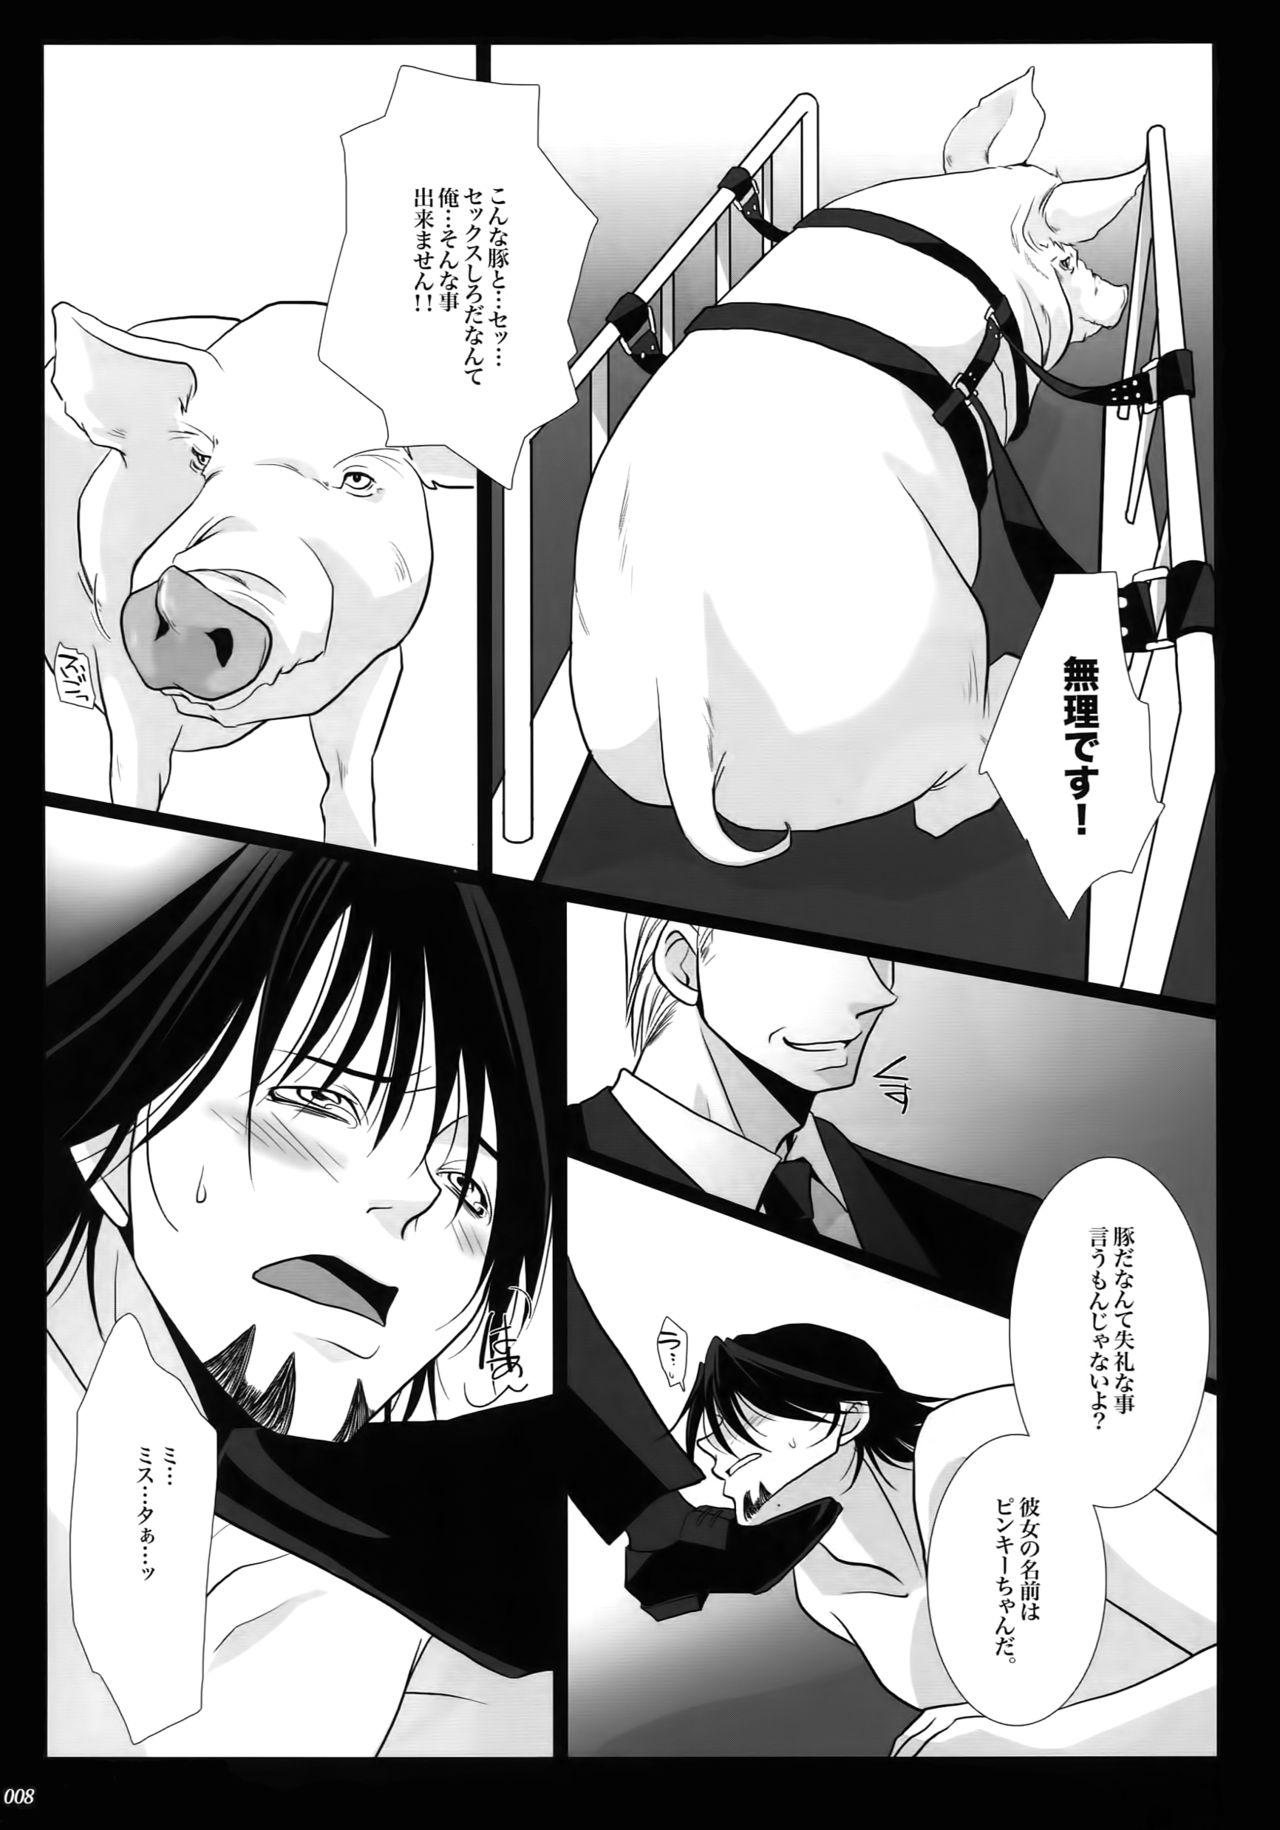 Teen mob;Re - Tiger and bunny Black Dick - Page 7